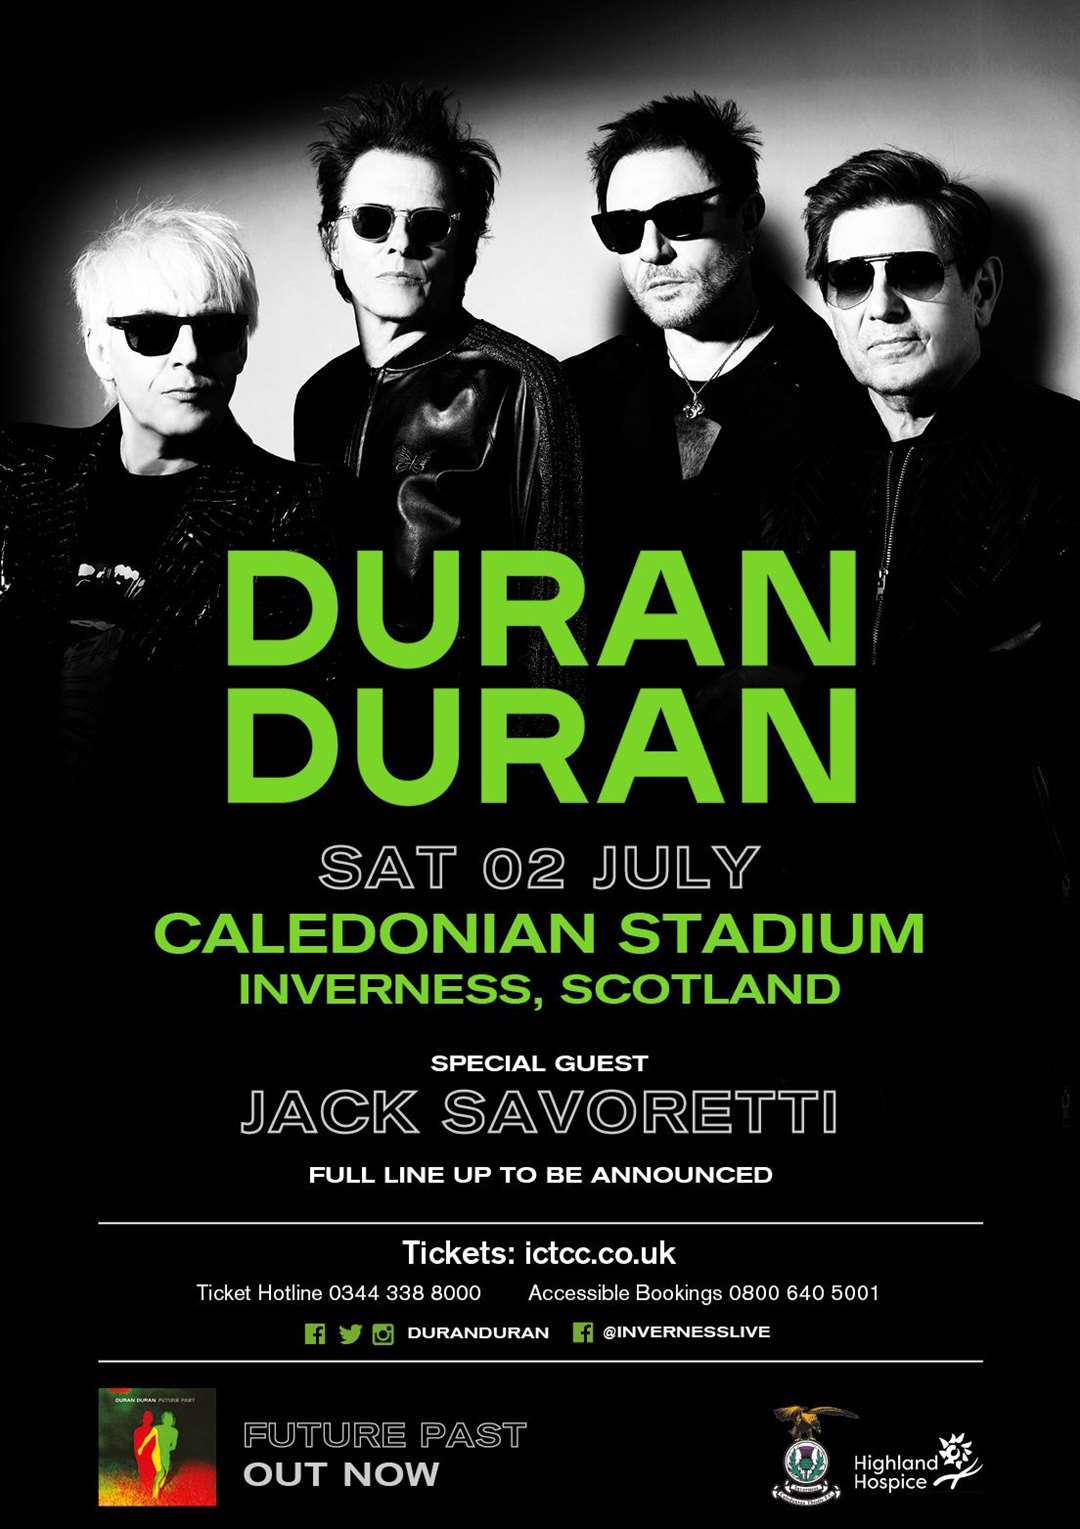 Duran Duran to play Inverness next July.